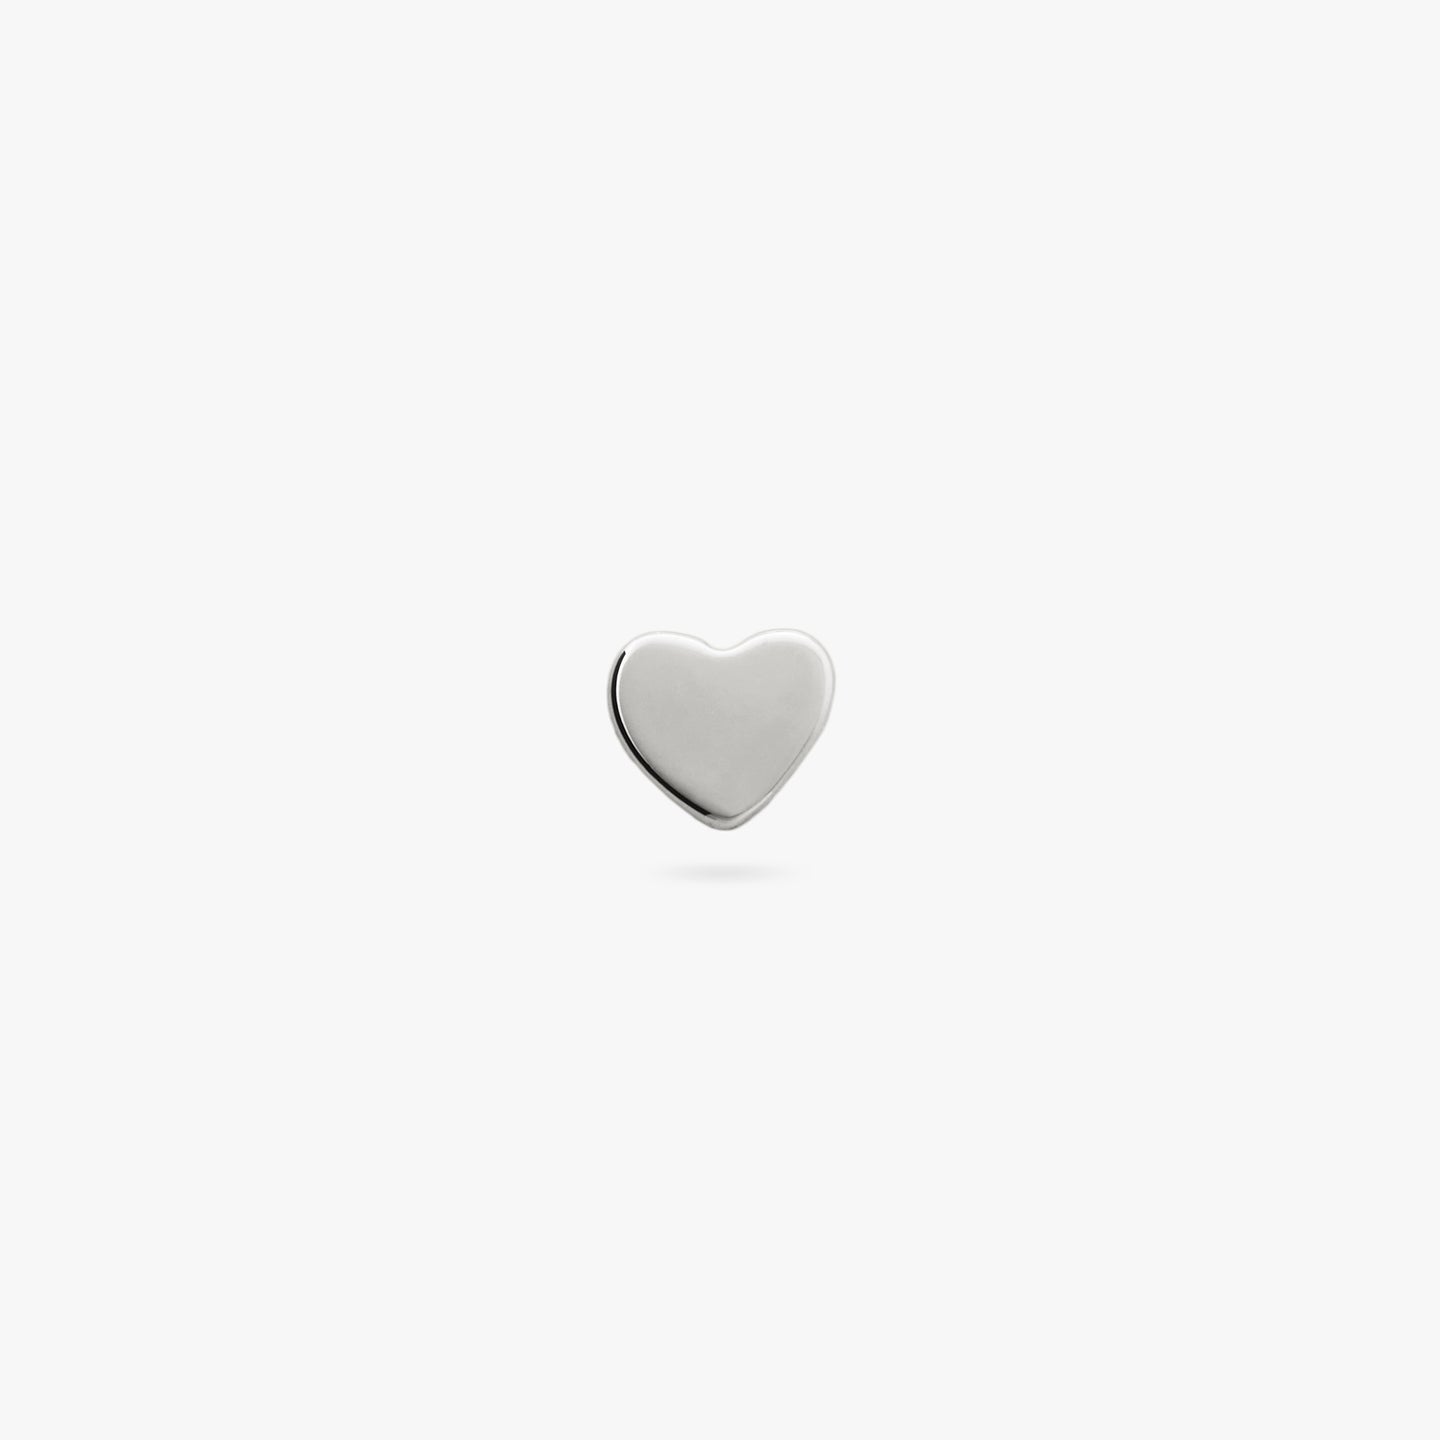 This is a small silver stud in the shape of a heart color:null|silver